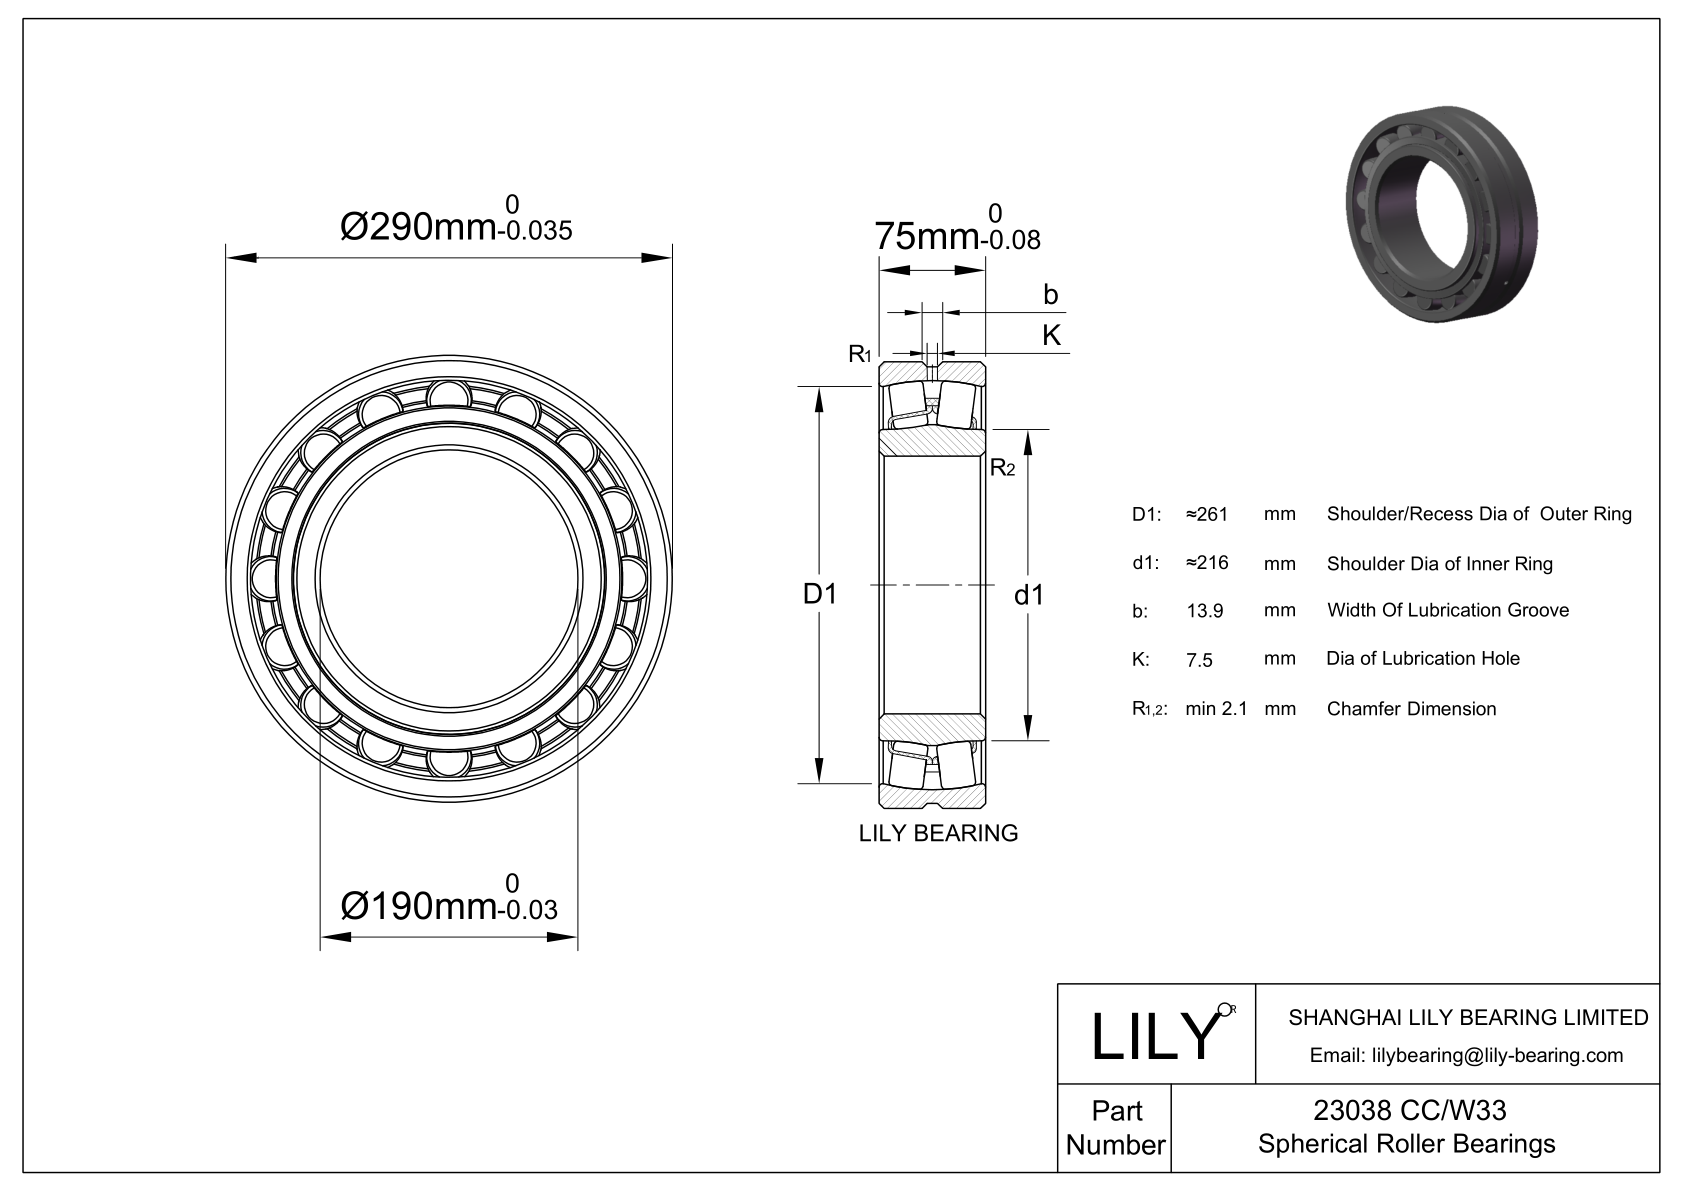 23038 CC/W33 Double Row Spherical Roller Bearing cad drawing